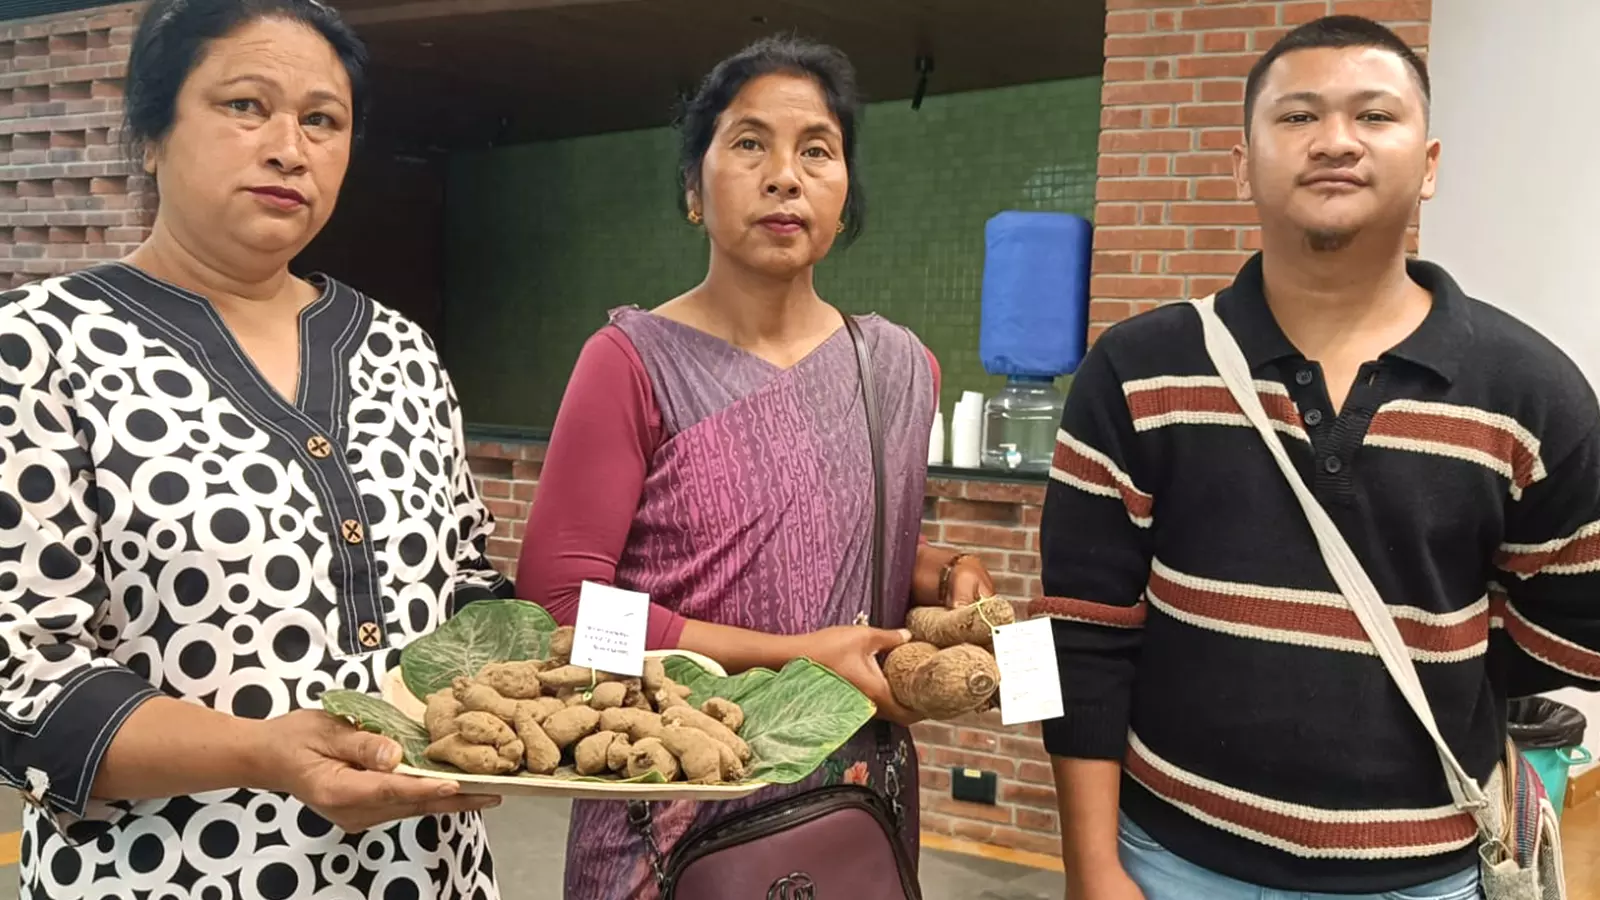 Arelcy Lyngdoh (left), Laitlin Lyngdoh (centre) and Kennyson Lyngdoh (right) pose for the camera as they promote Meghalayas tuber crops. Photos: Maitreyee Boruah